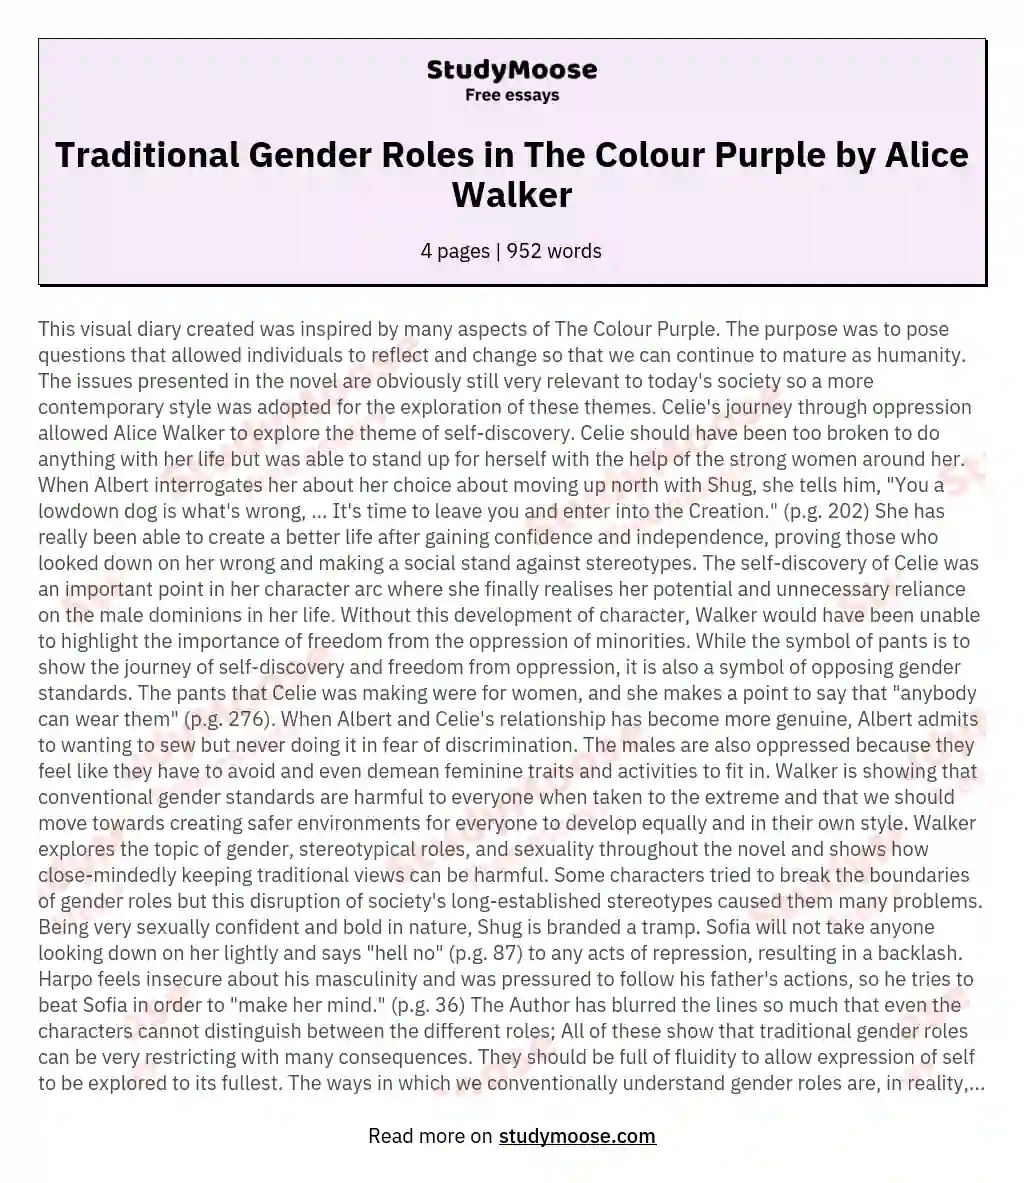 Traditional Gender Roles in The Colour Purple by Alice Walker